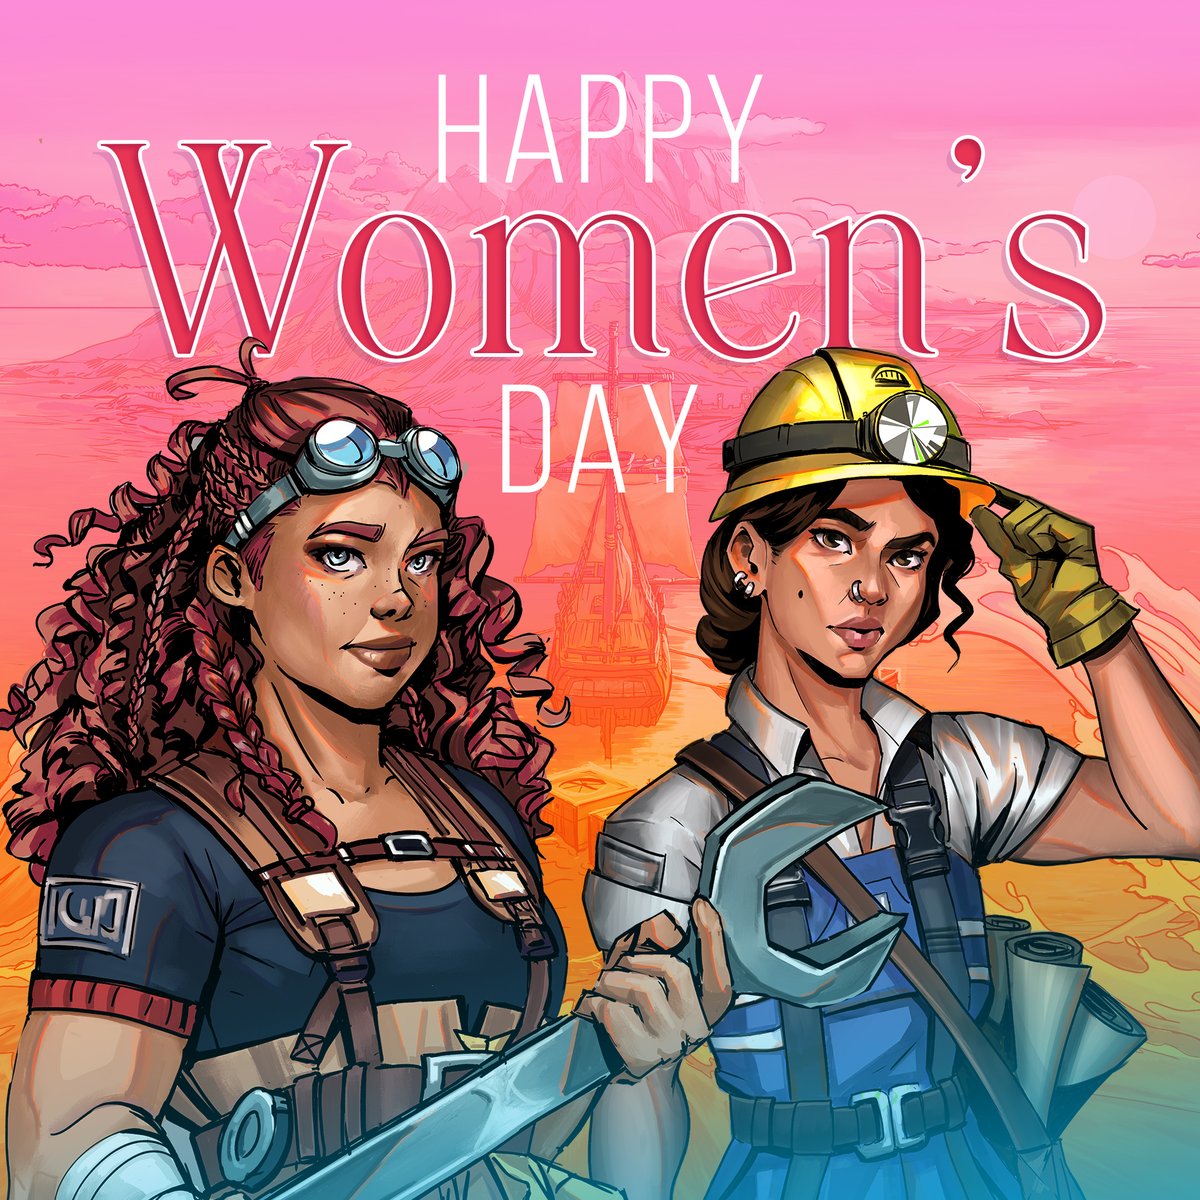 Happy Women's Day to all the incredible Women out there! 🎮💖 Whether you're slaying dragons, fragging in FPS games, or building epic empires, your skills and passion make this community stronger. Thank you! ❤ #InternationalWomensDay